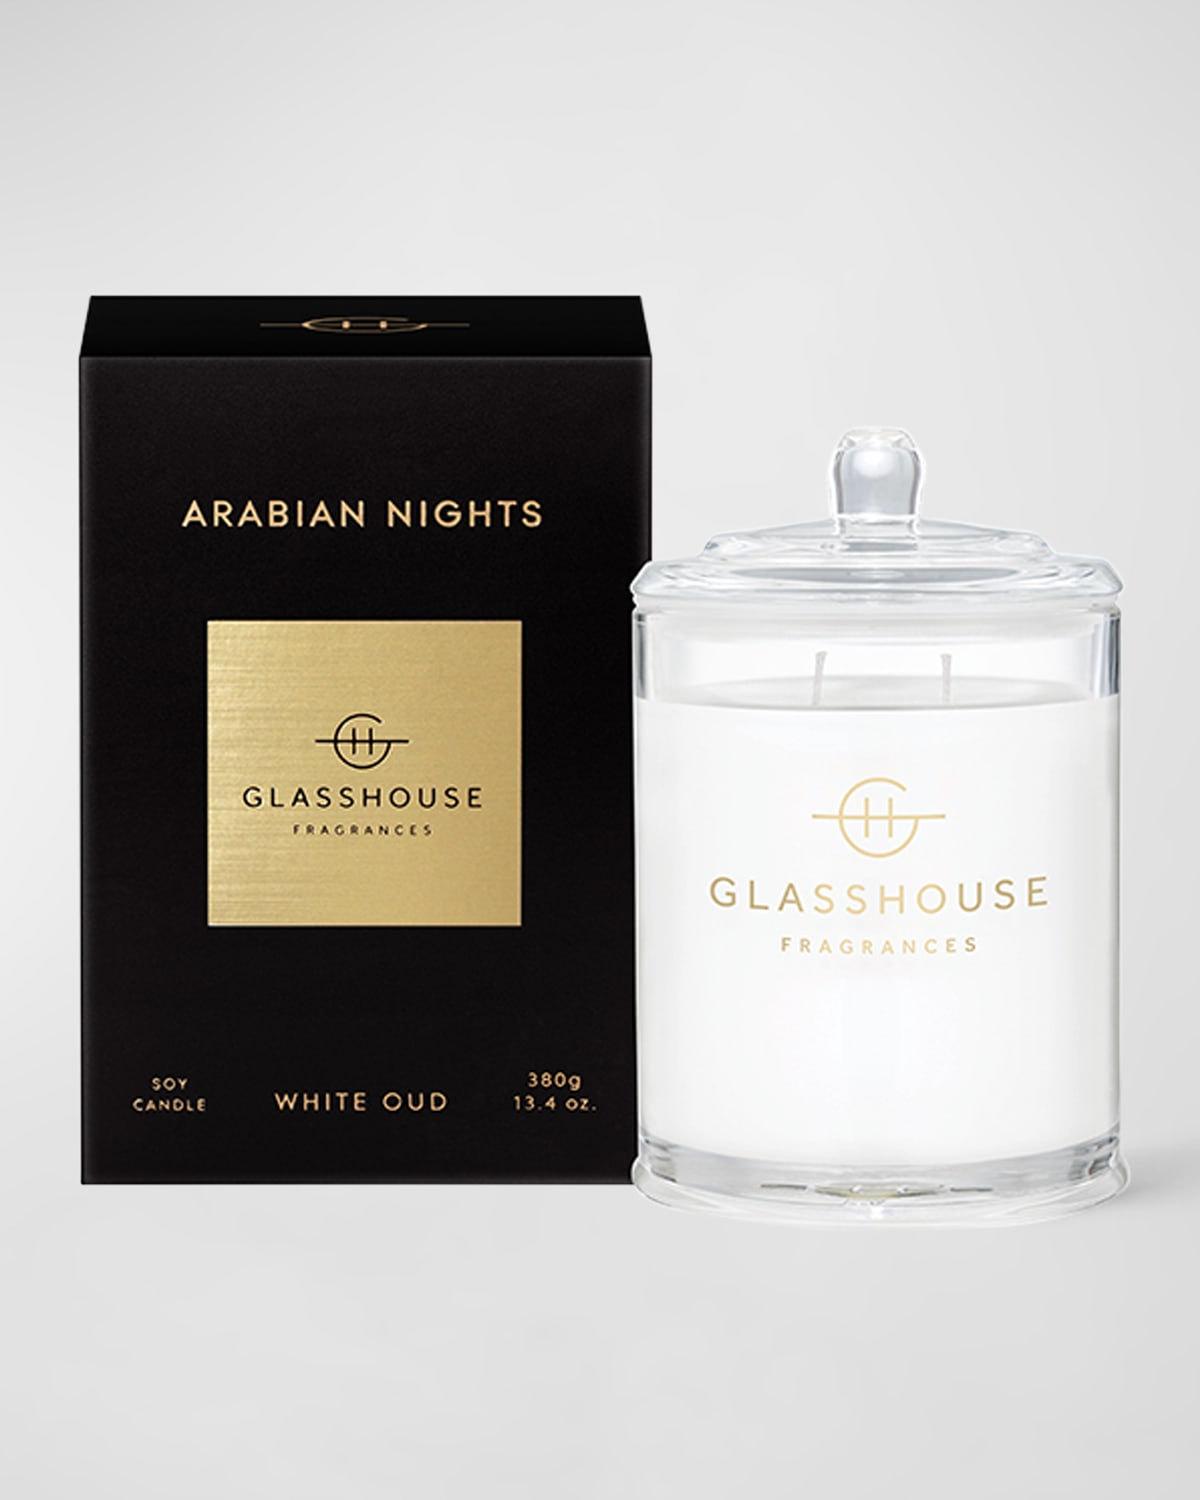 Glasshouse Fragrances 13.4 Oz. Arabian Nights Scented Candle In Black